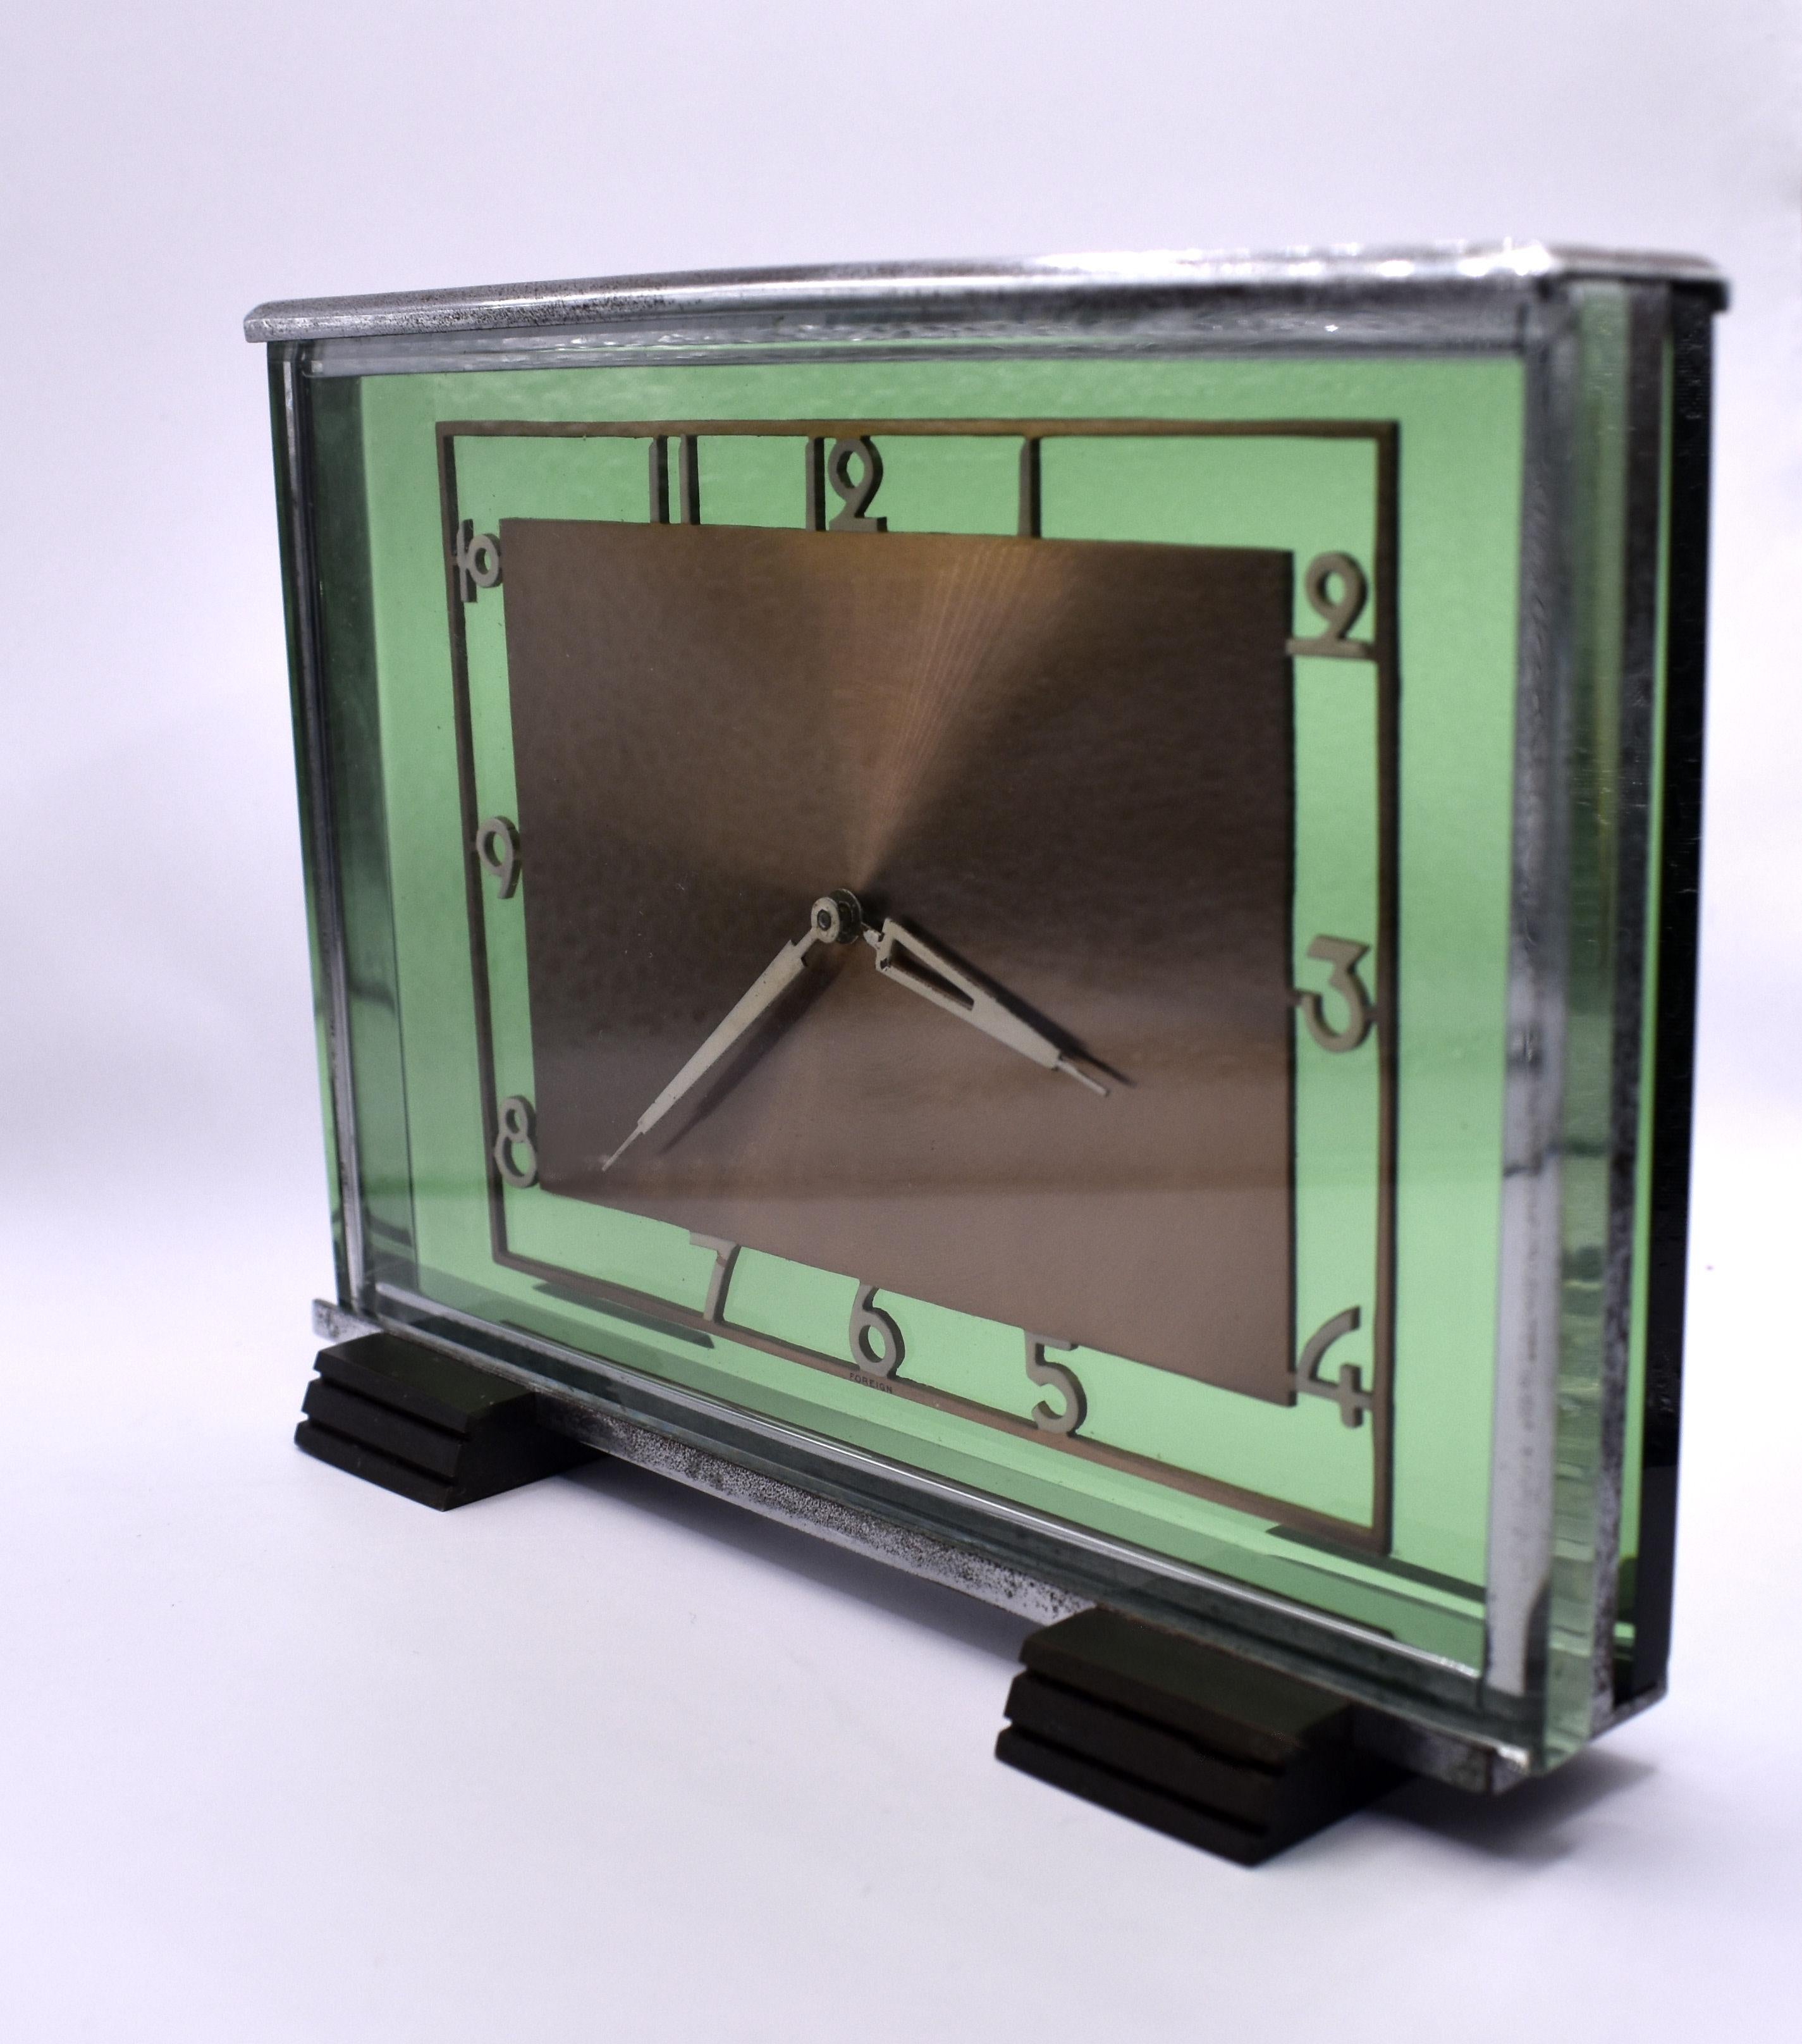 Still with it's original box is this Very impressive and rare 1930's Art Deco green and clear glass and chrome 8 day clock. Superb condition, just some mild corrosion to some areas of the chrome as you could expect from a period piece of 90 odd